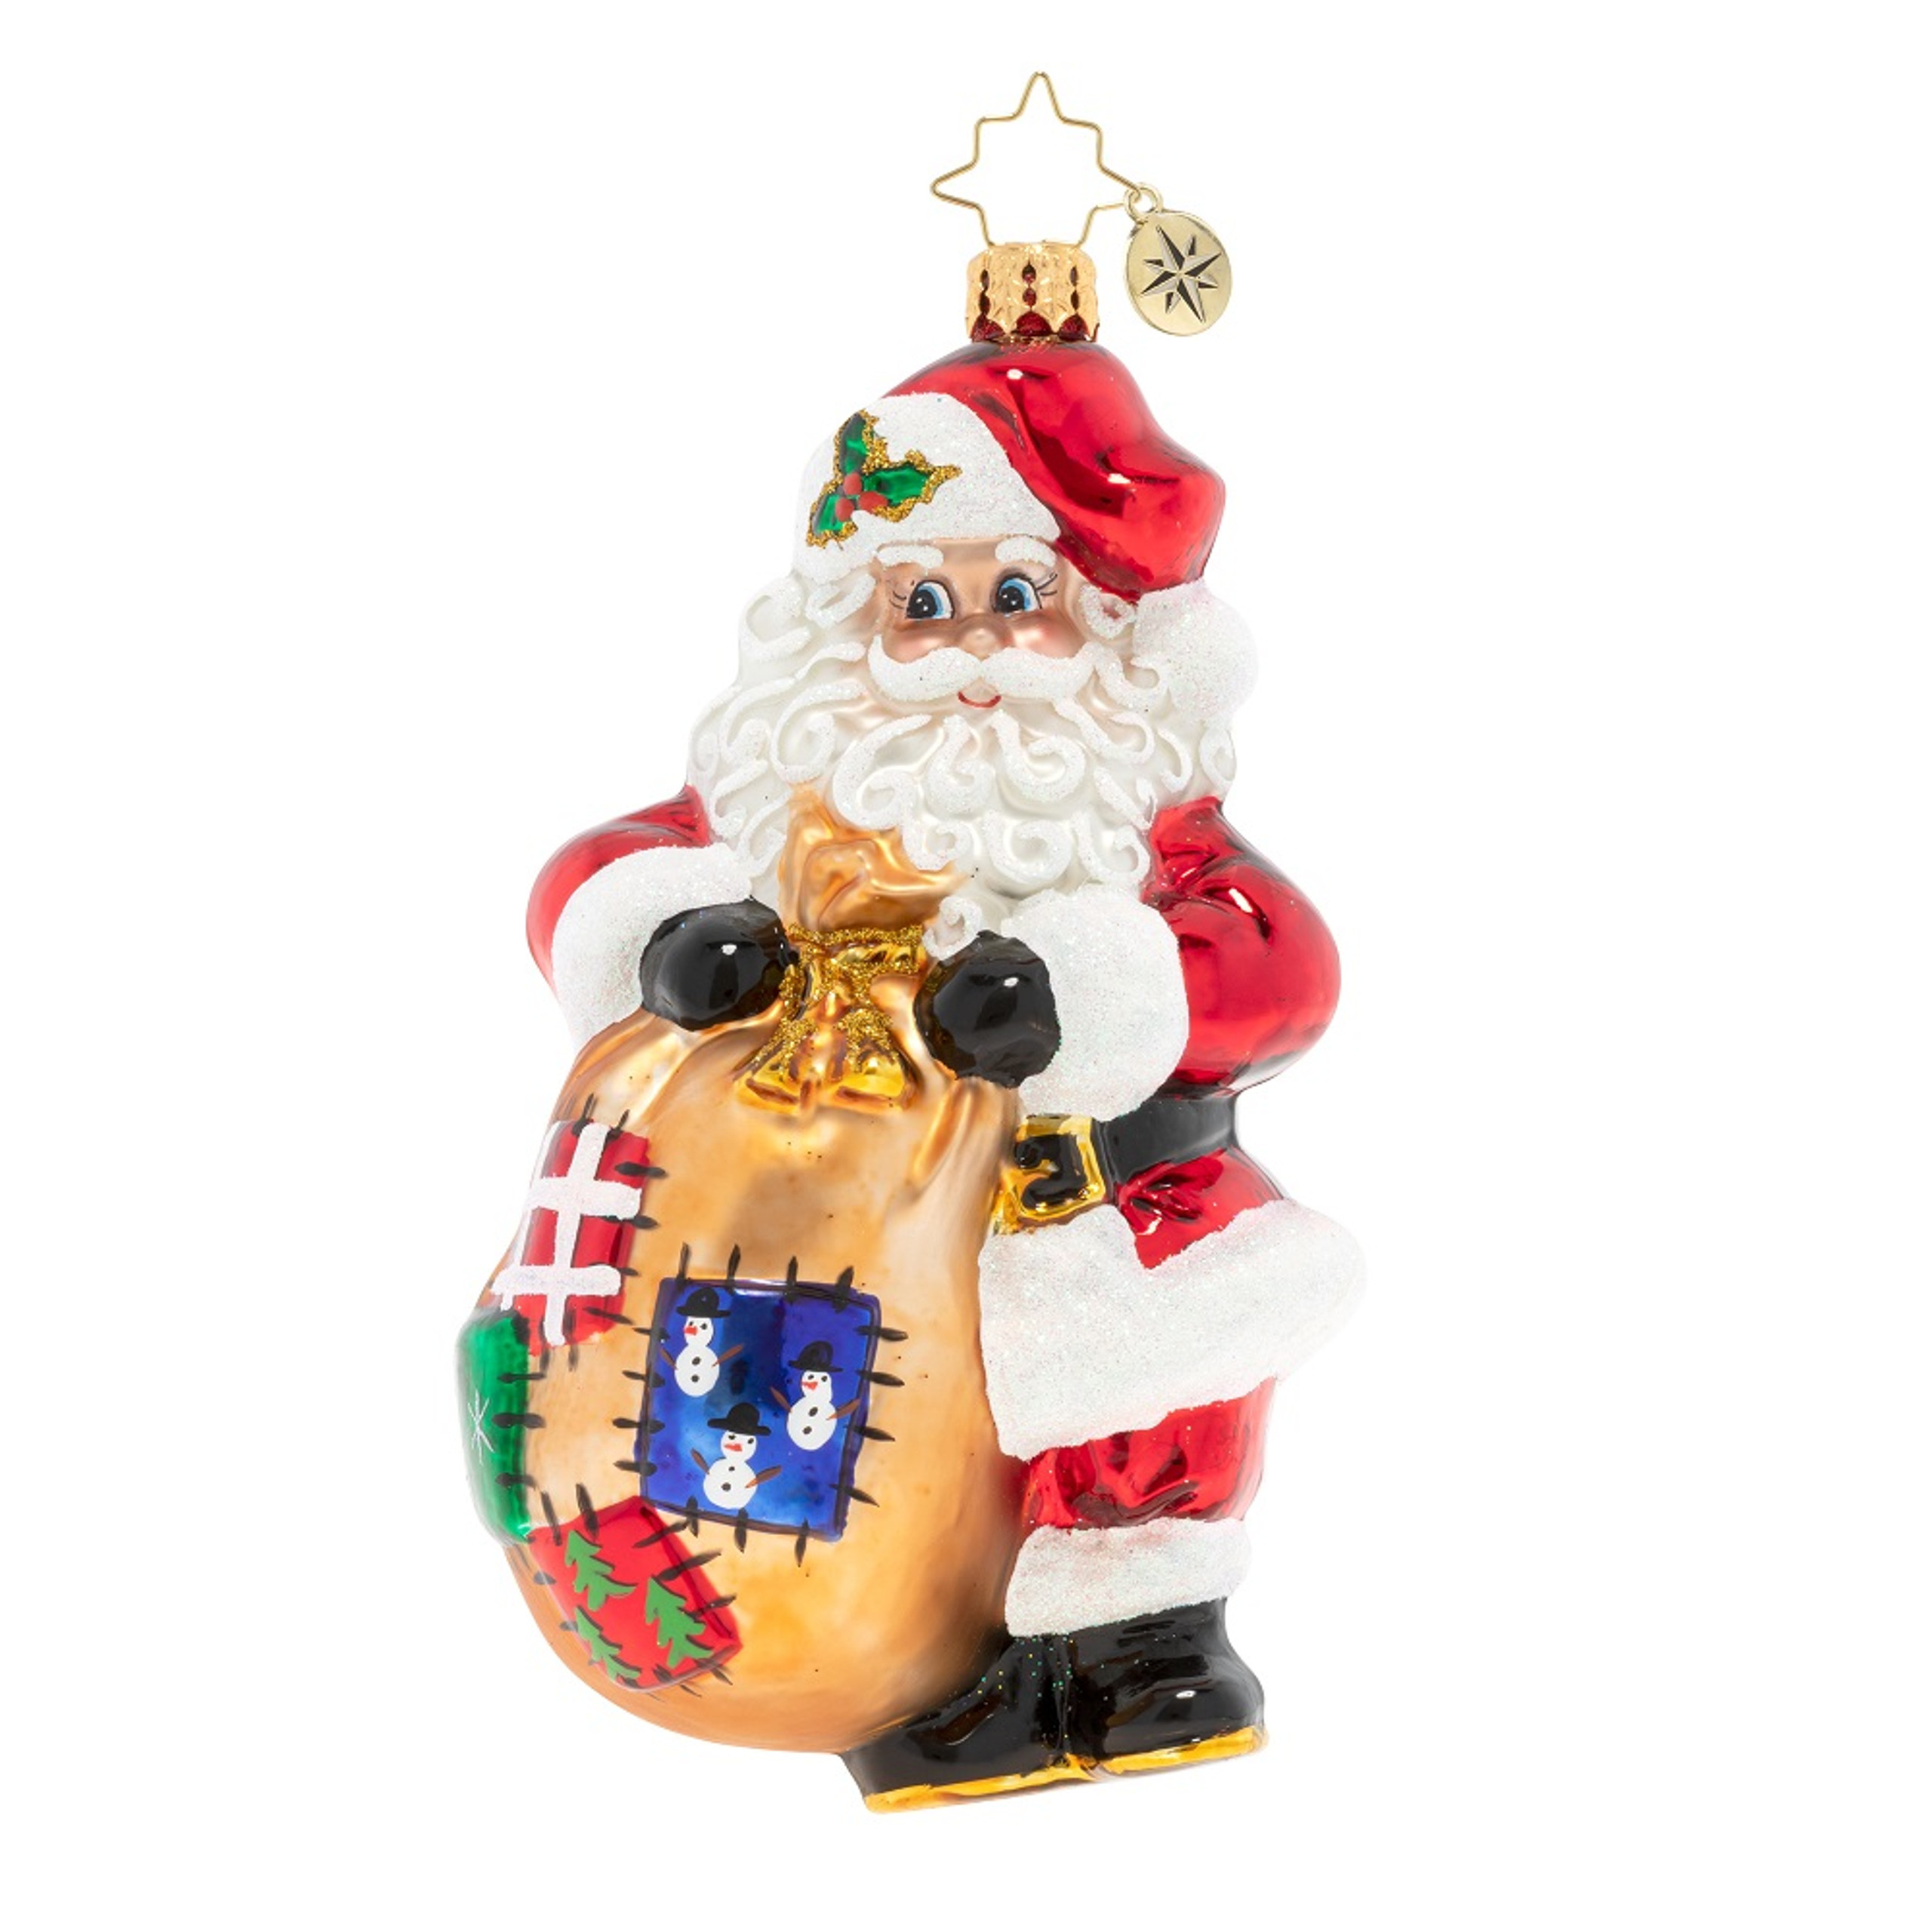 Shop Distinctive Decor by Category - Holiday Ornaments, Collectibles ...